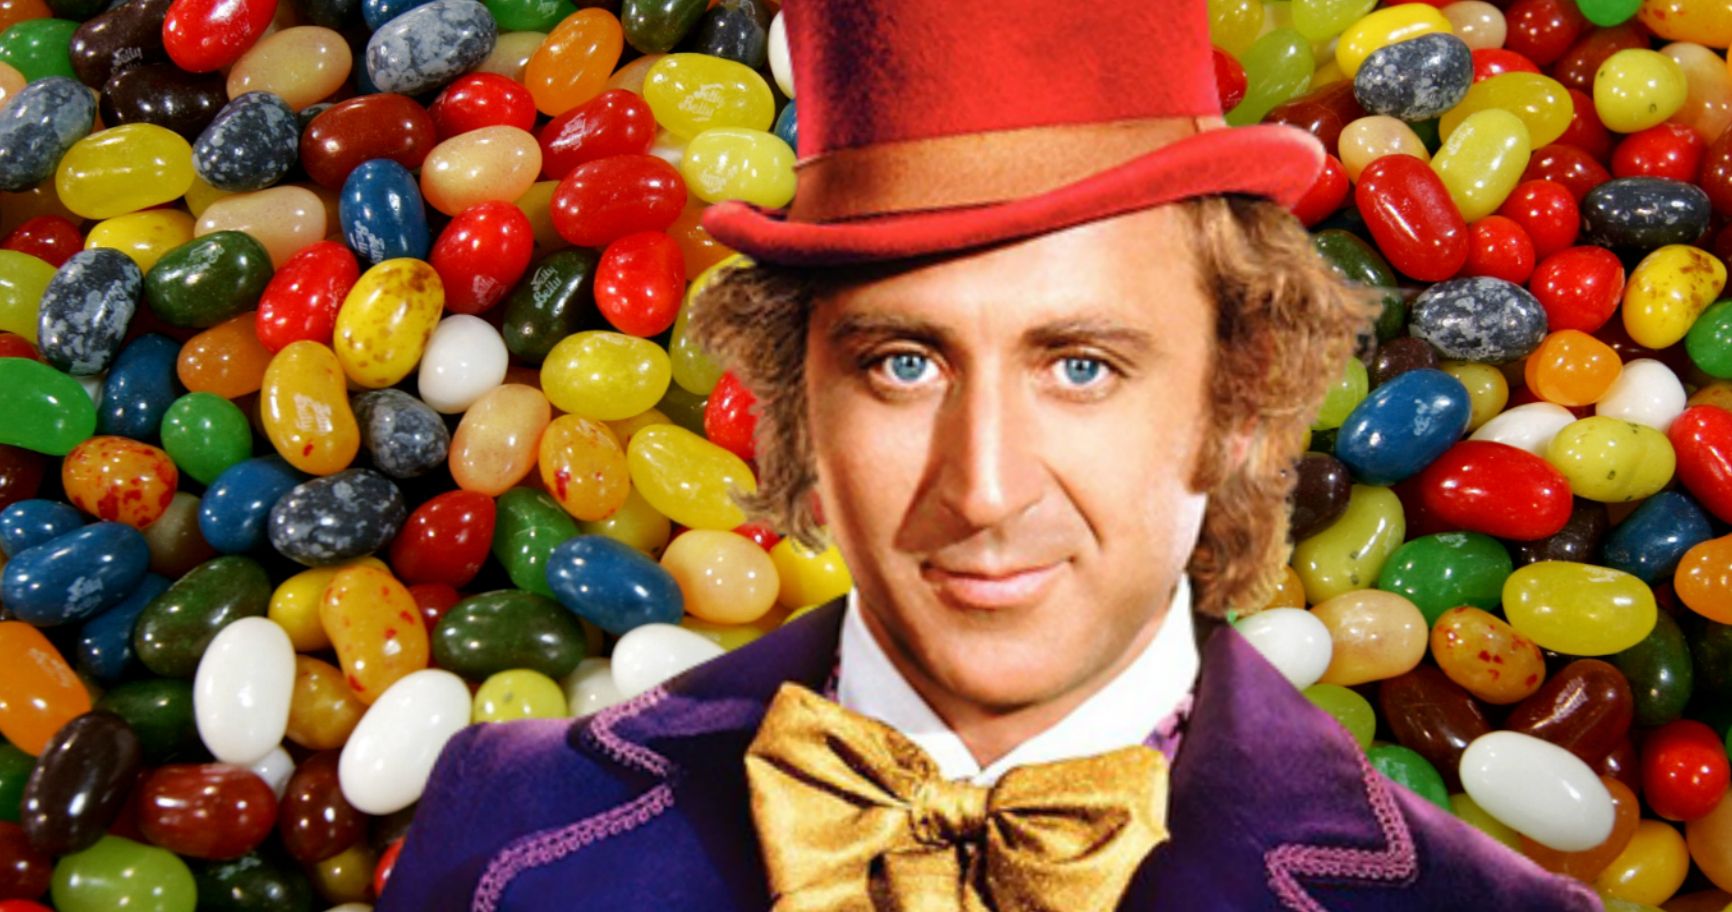 Willy Wonka Inspired Golden Ticket Treasure Hunt Launched by Jelly 